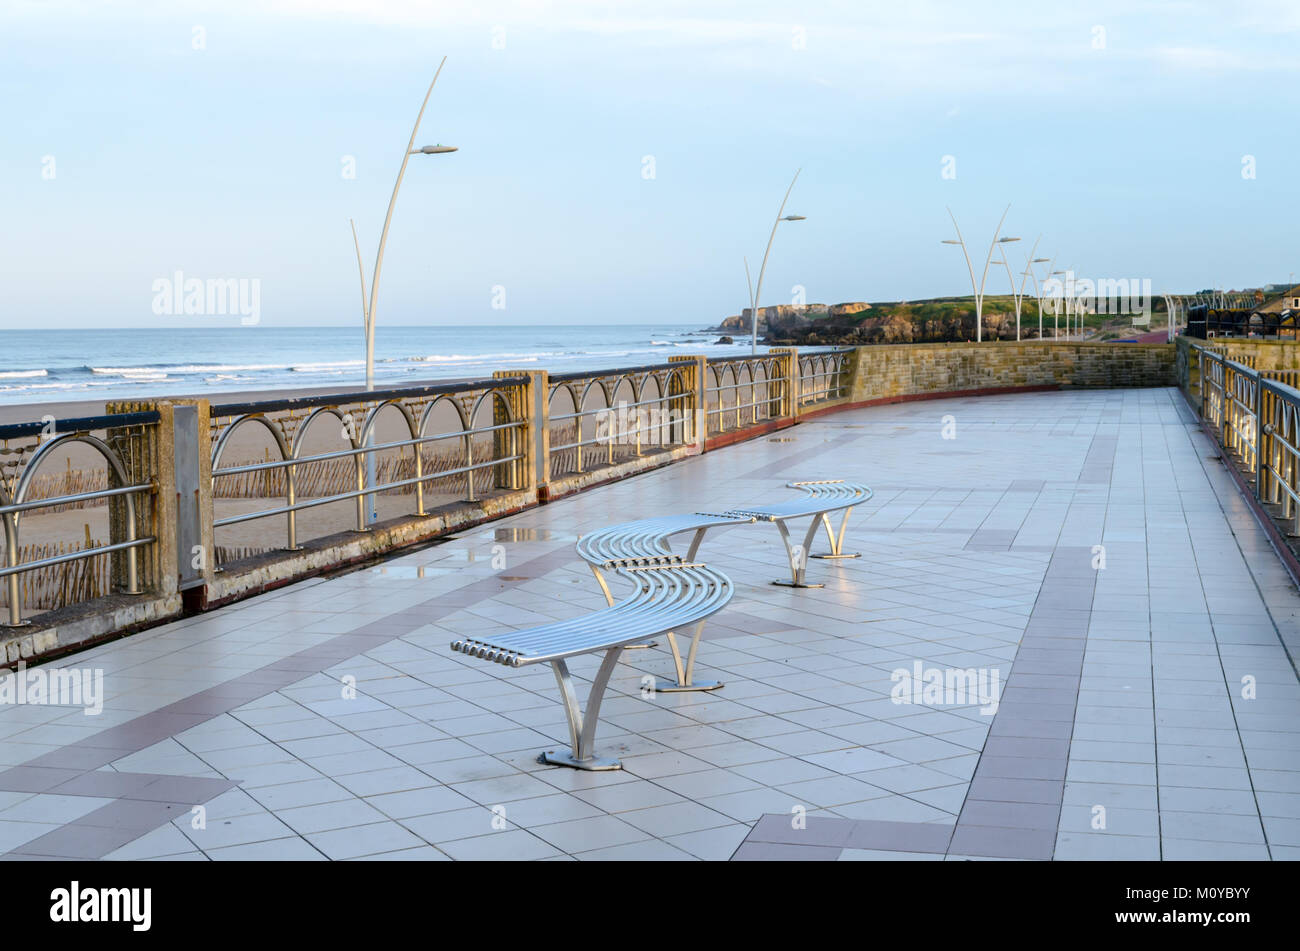 Upper Deckway of The Arcade located at The Amphitheatre, South Shields Stock Photo